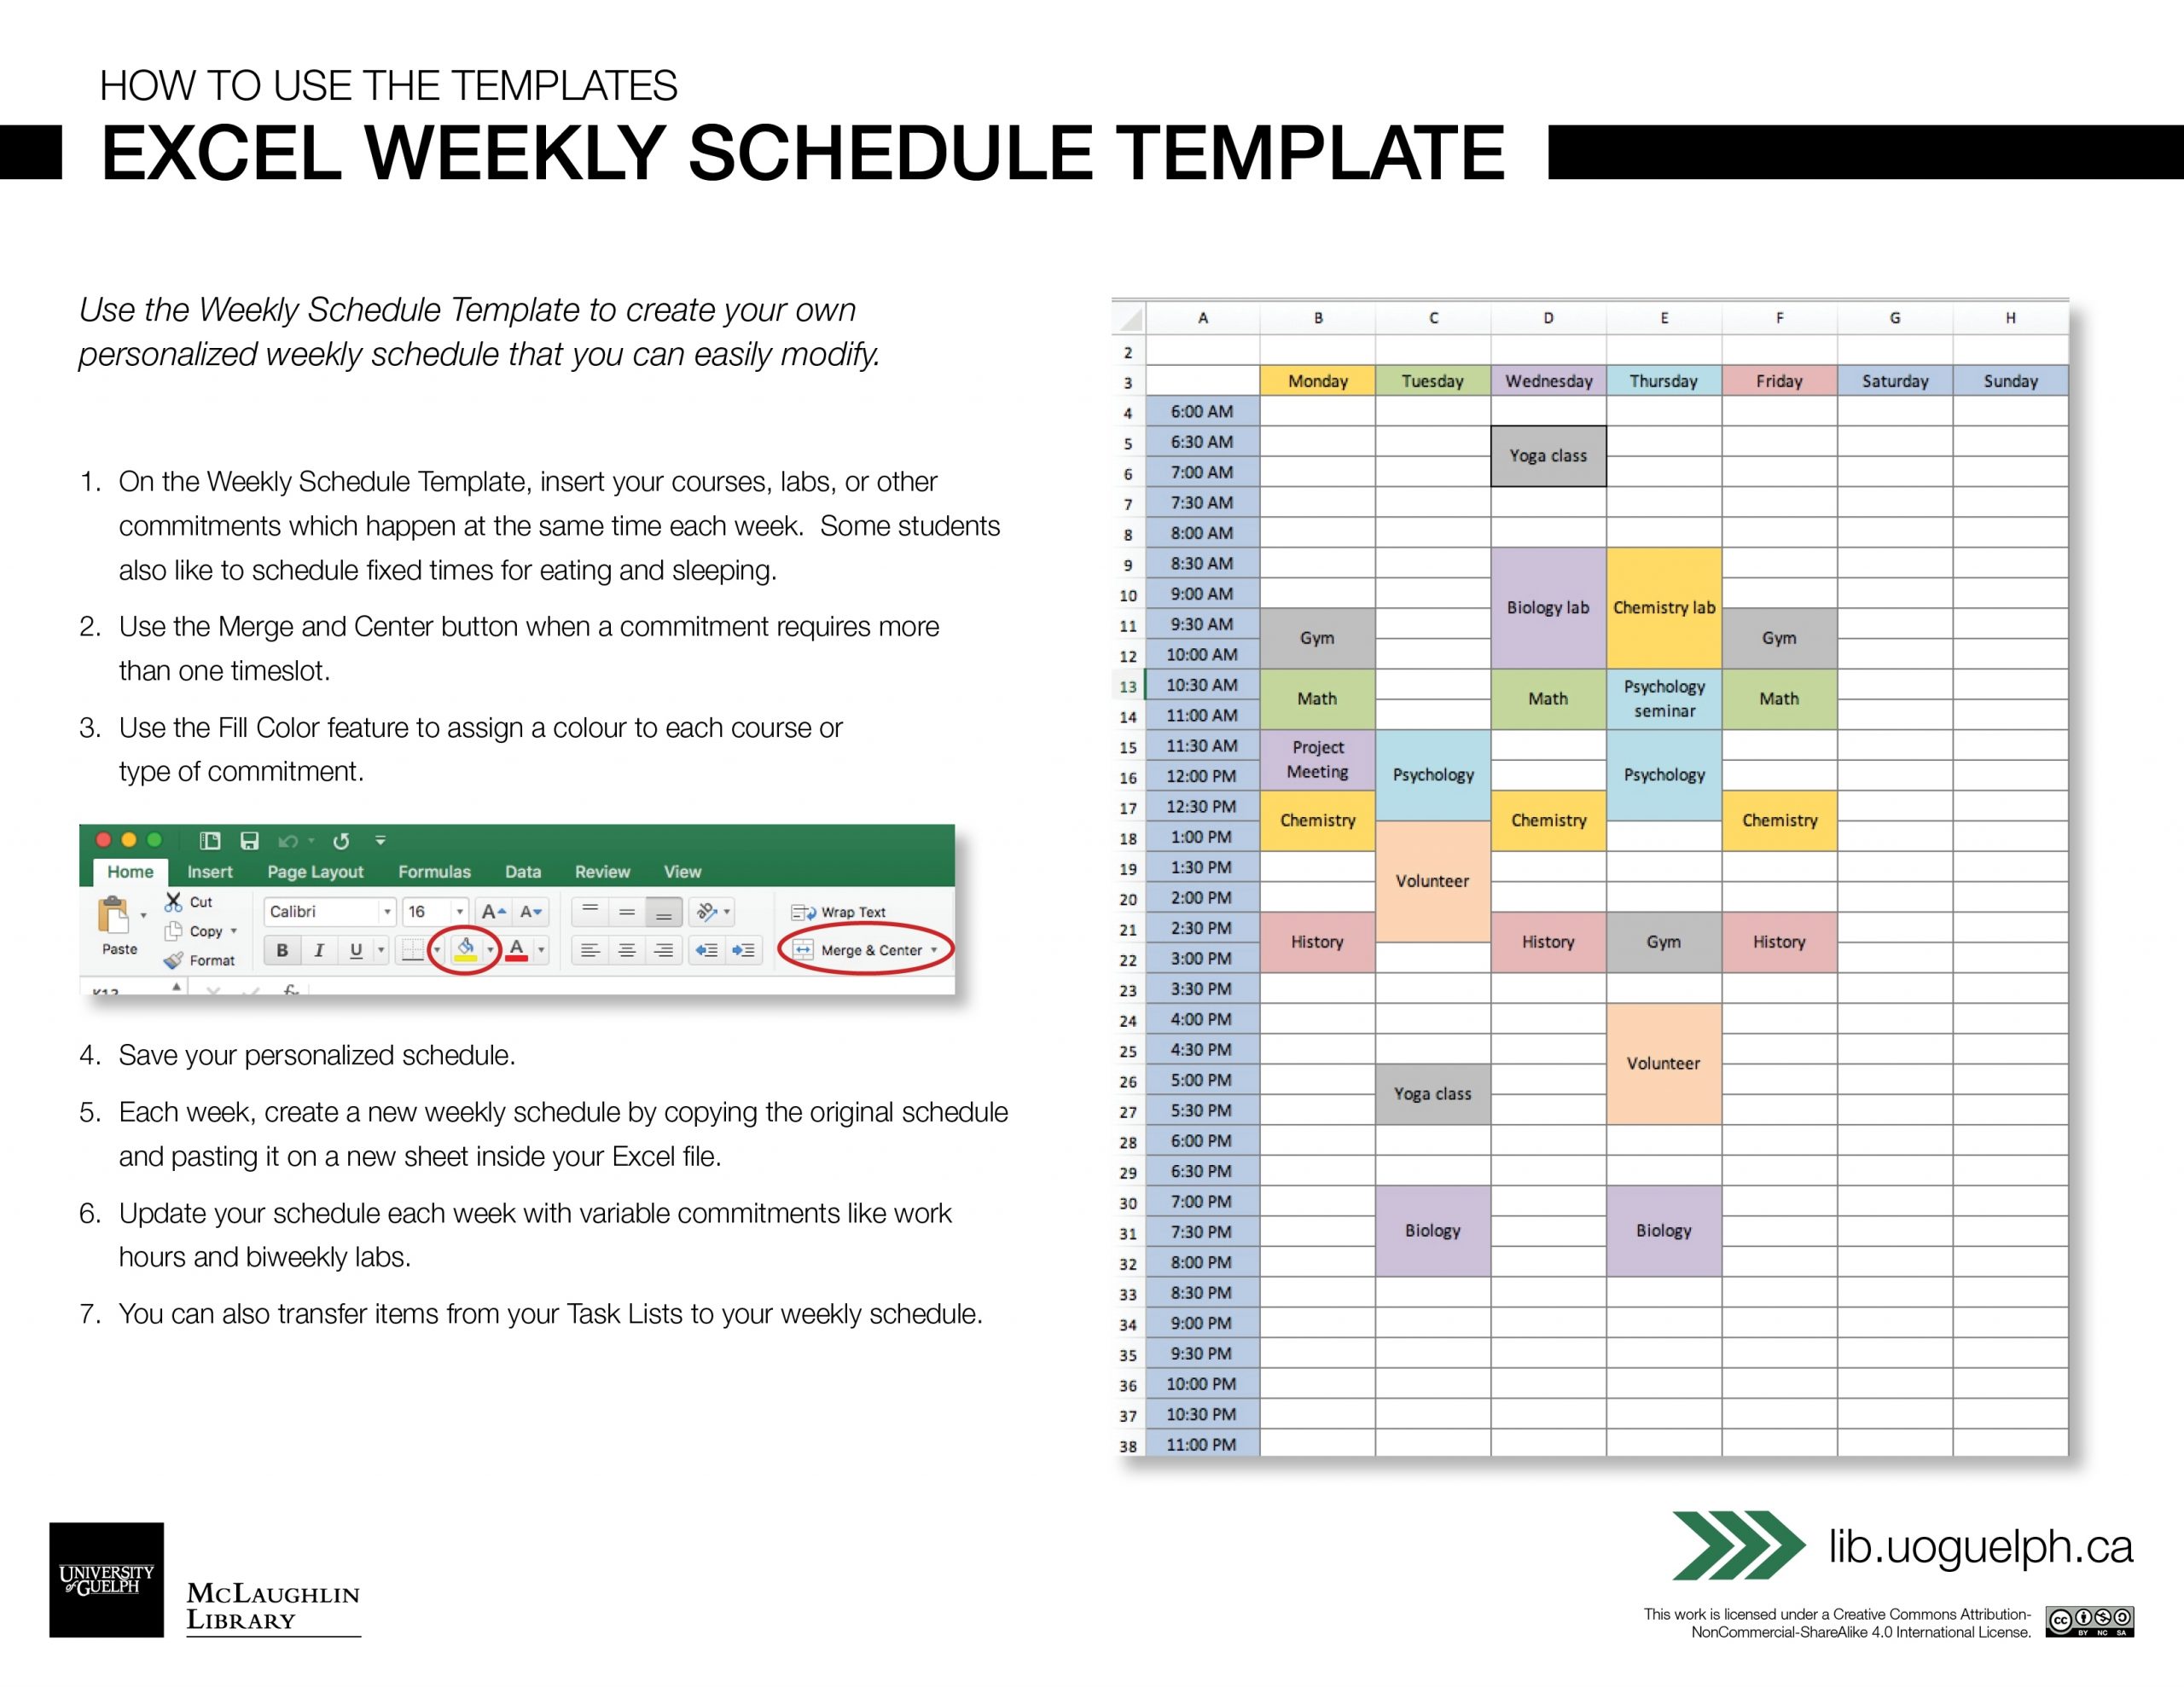 Excel Weekly Schedule Template | Digital Learning Commons